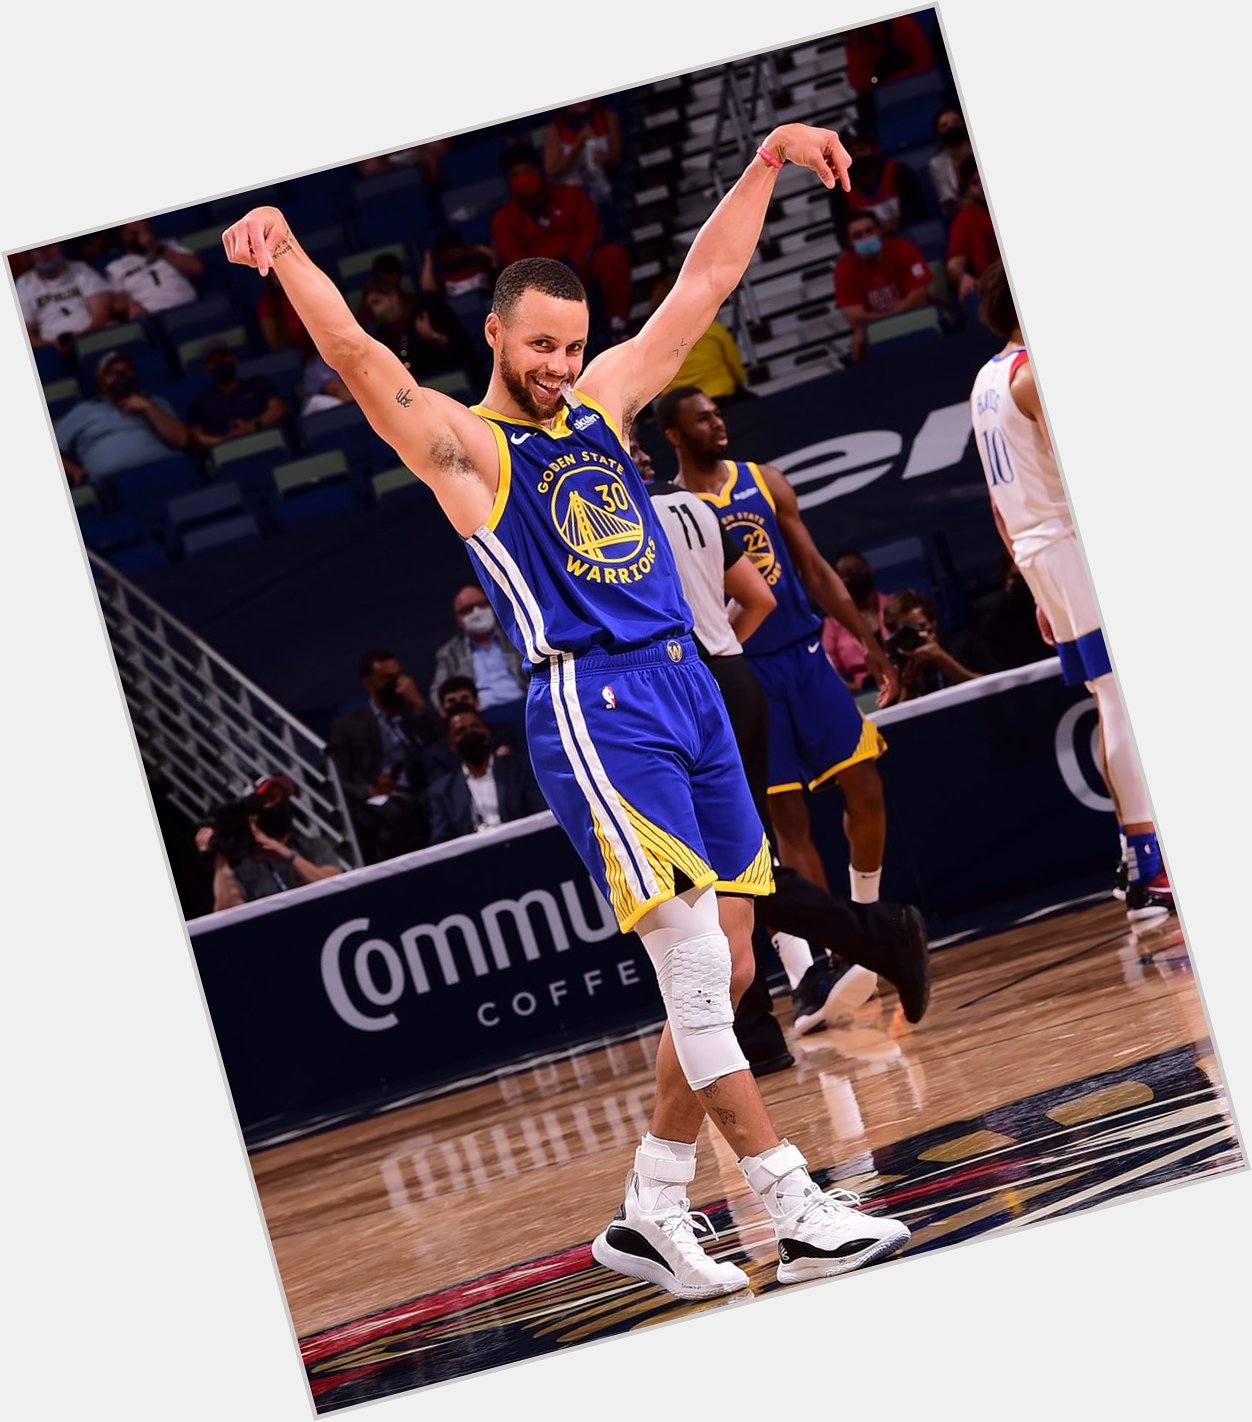   Happy Birthday Stephen Curry

Rep 30 and shop with to score 10% Cash Back 